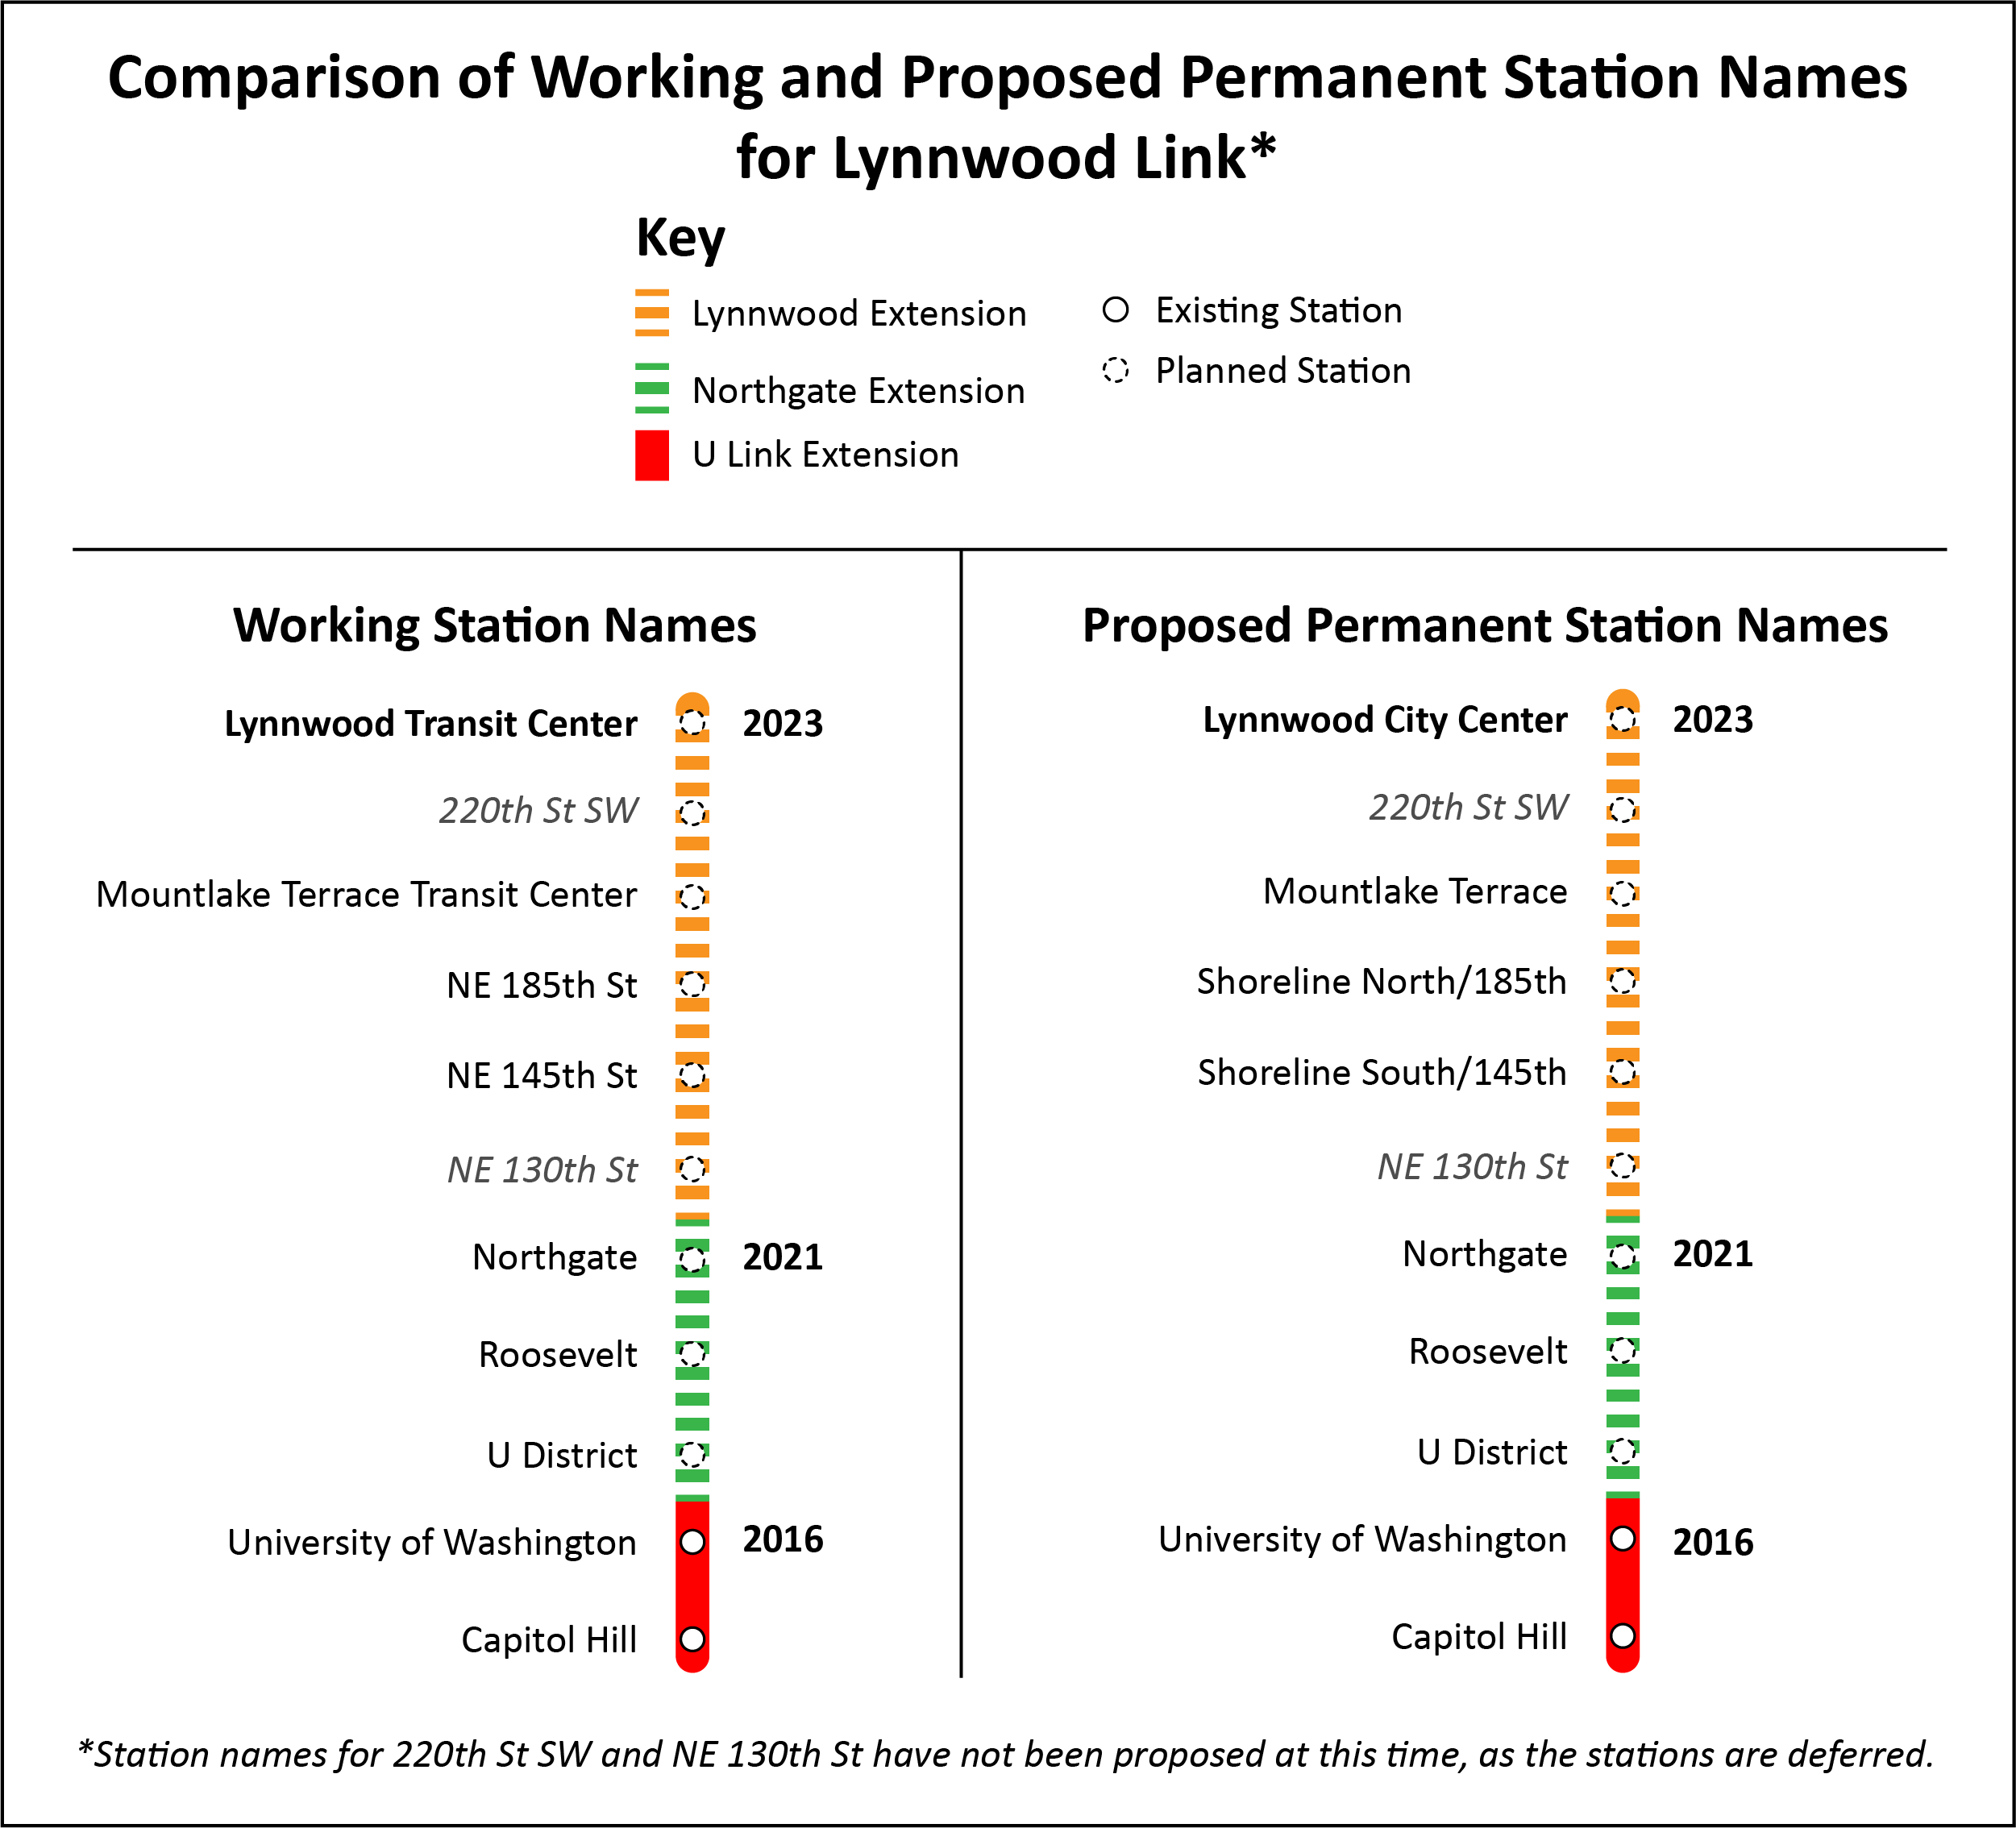 A comparison of the working and proposed permanent station names for the Lynnwood Link extension.